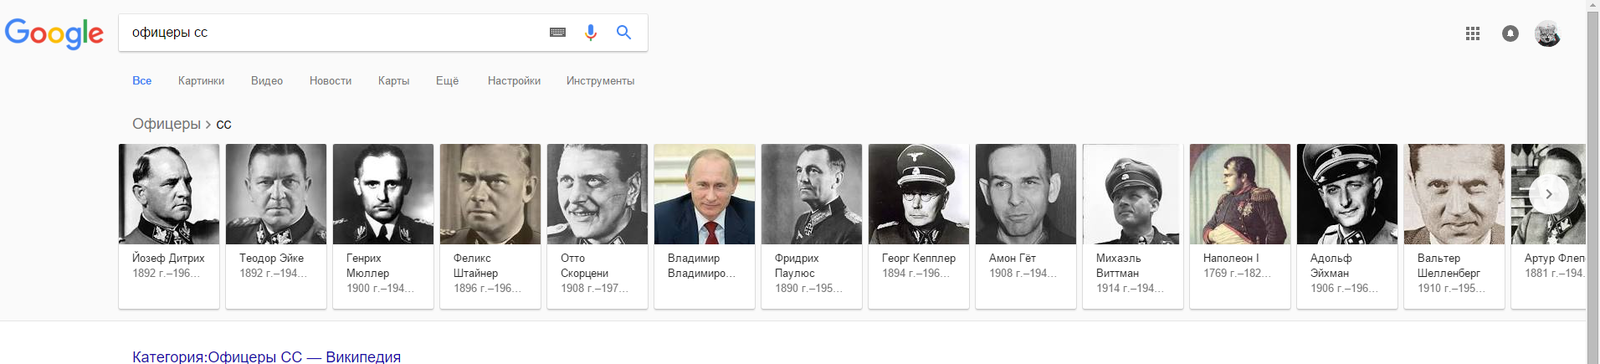 Google knows everything... - Vladimir Putin, SS troops, Officers, Search queries